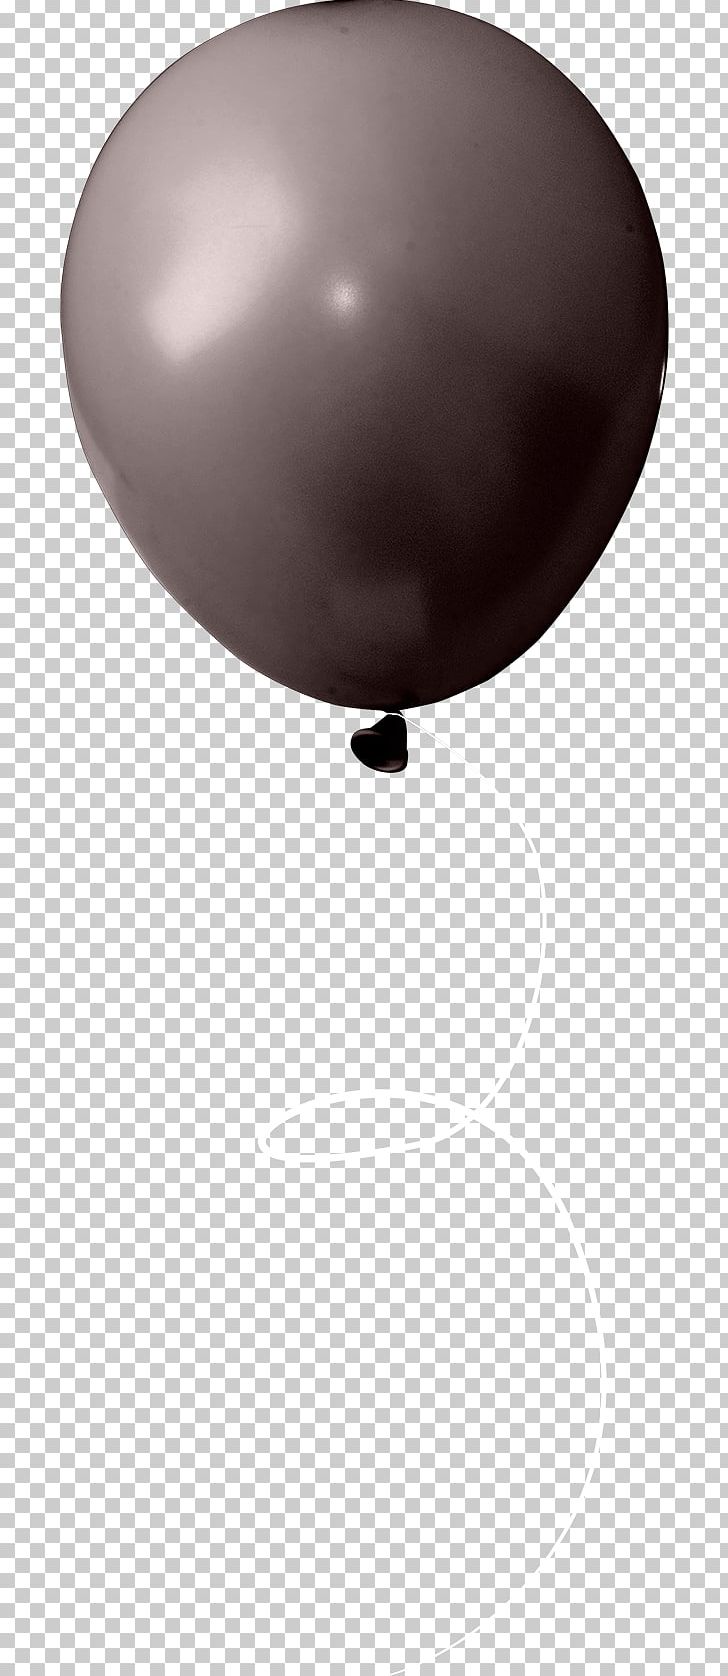 Lighting Ceiling Brown White PNG, Clipart, Balloon, Balloon Cartoon, Balloon Decoration Material, Balloons, Birthday Balloons Free PNG Download